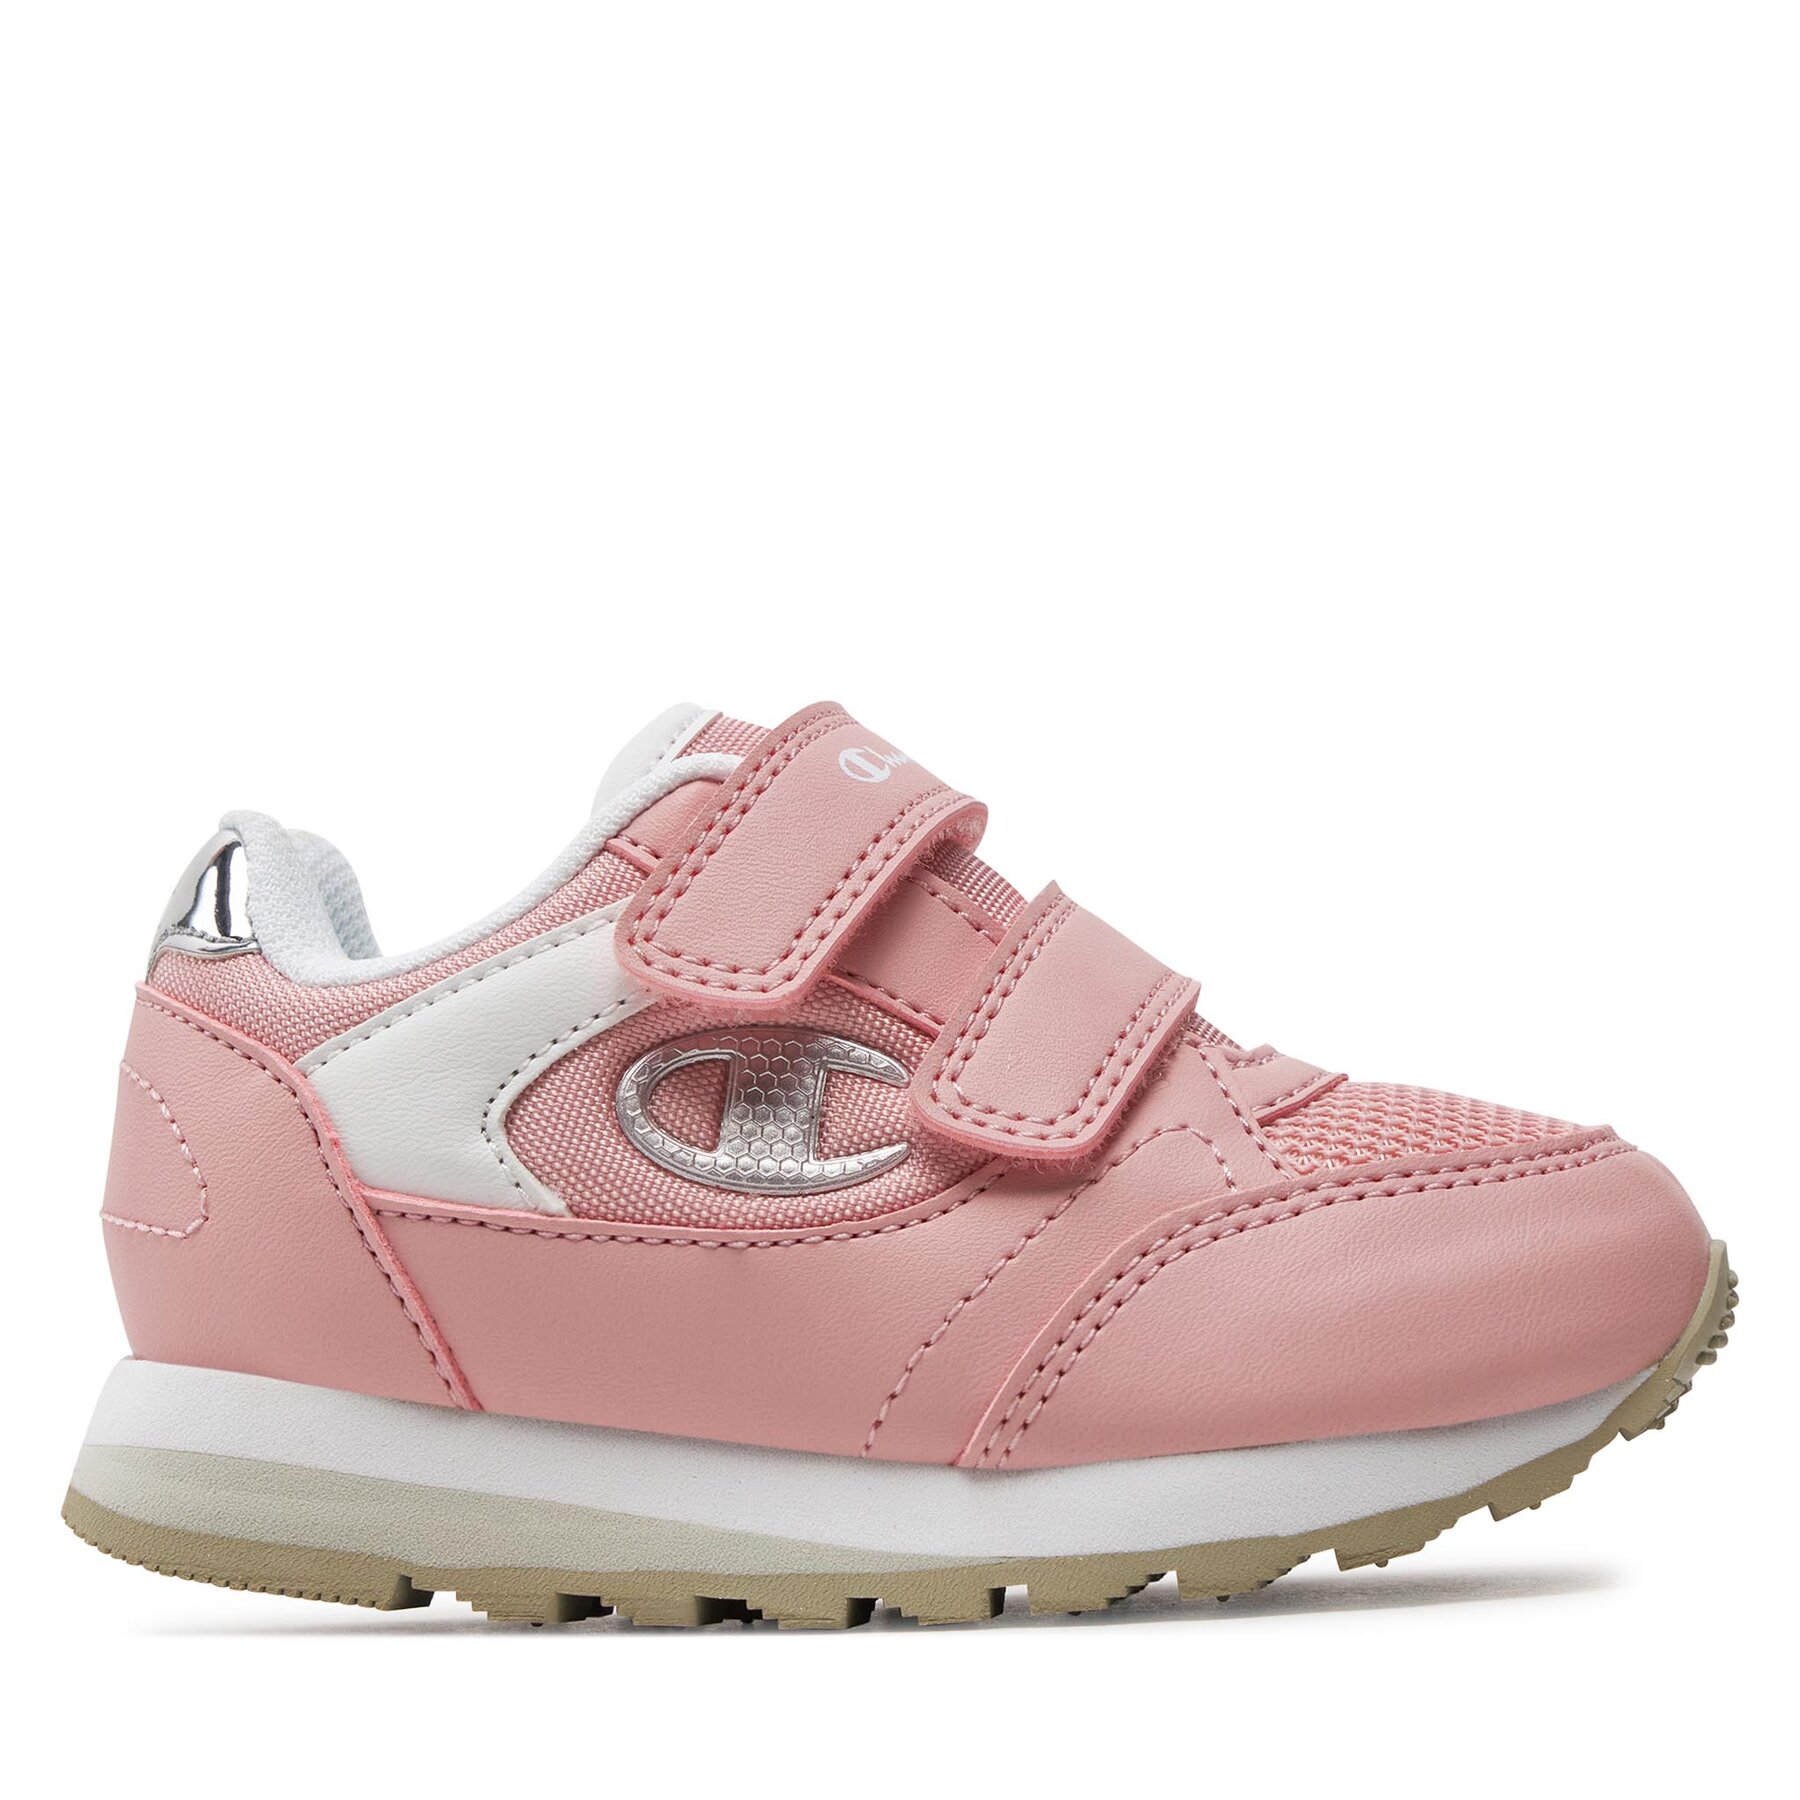 Sneakers Champion Rr Champ Ii G Td Low Cut Shoe S32755-CHA-PS127 Dusty Rose/Silver von Champion